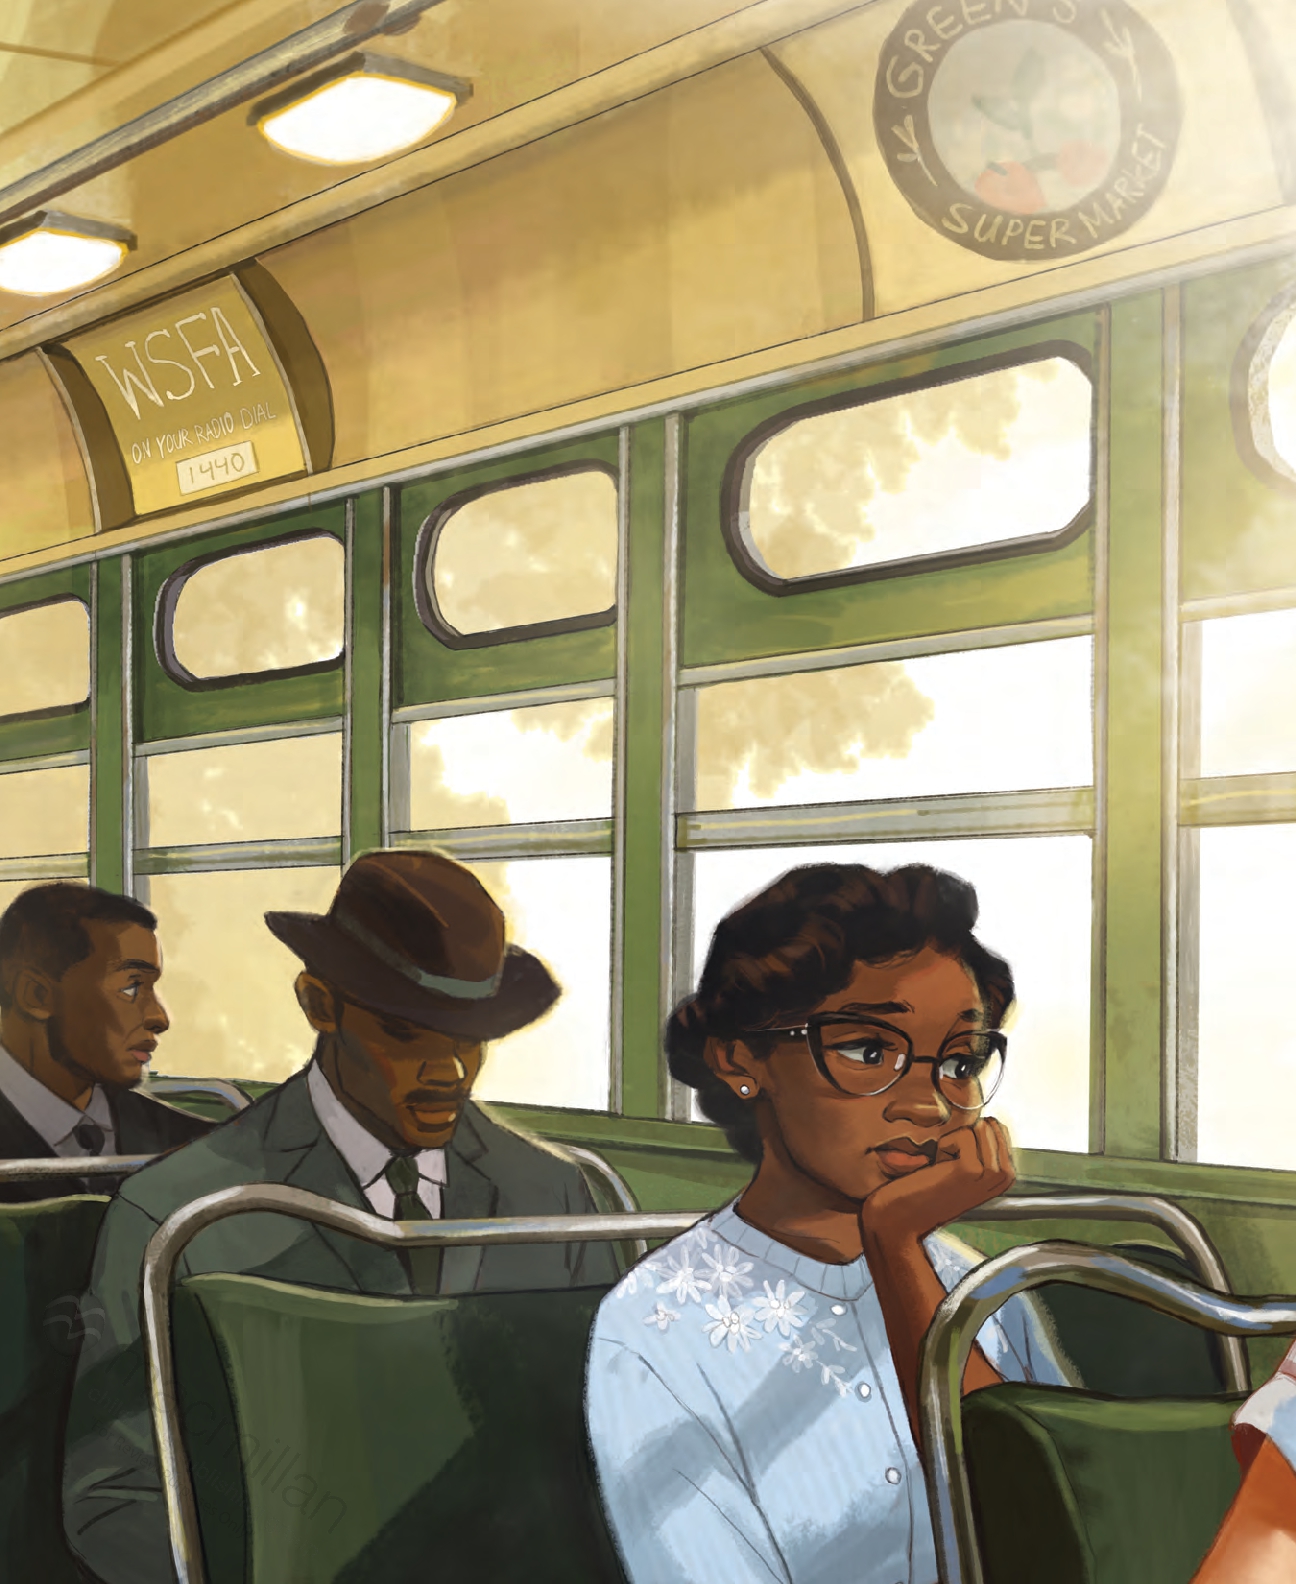 Claudette Colvin: I Want Freedom Now!